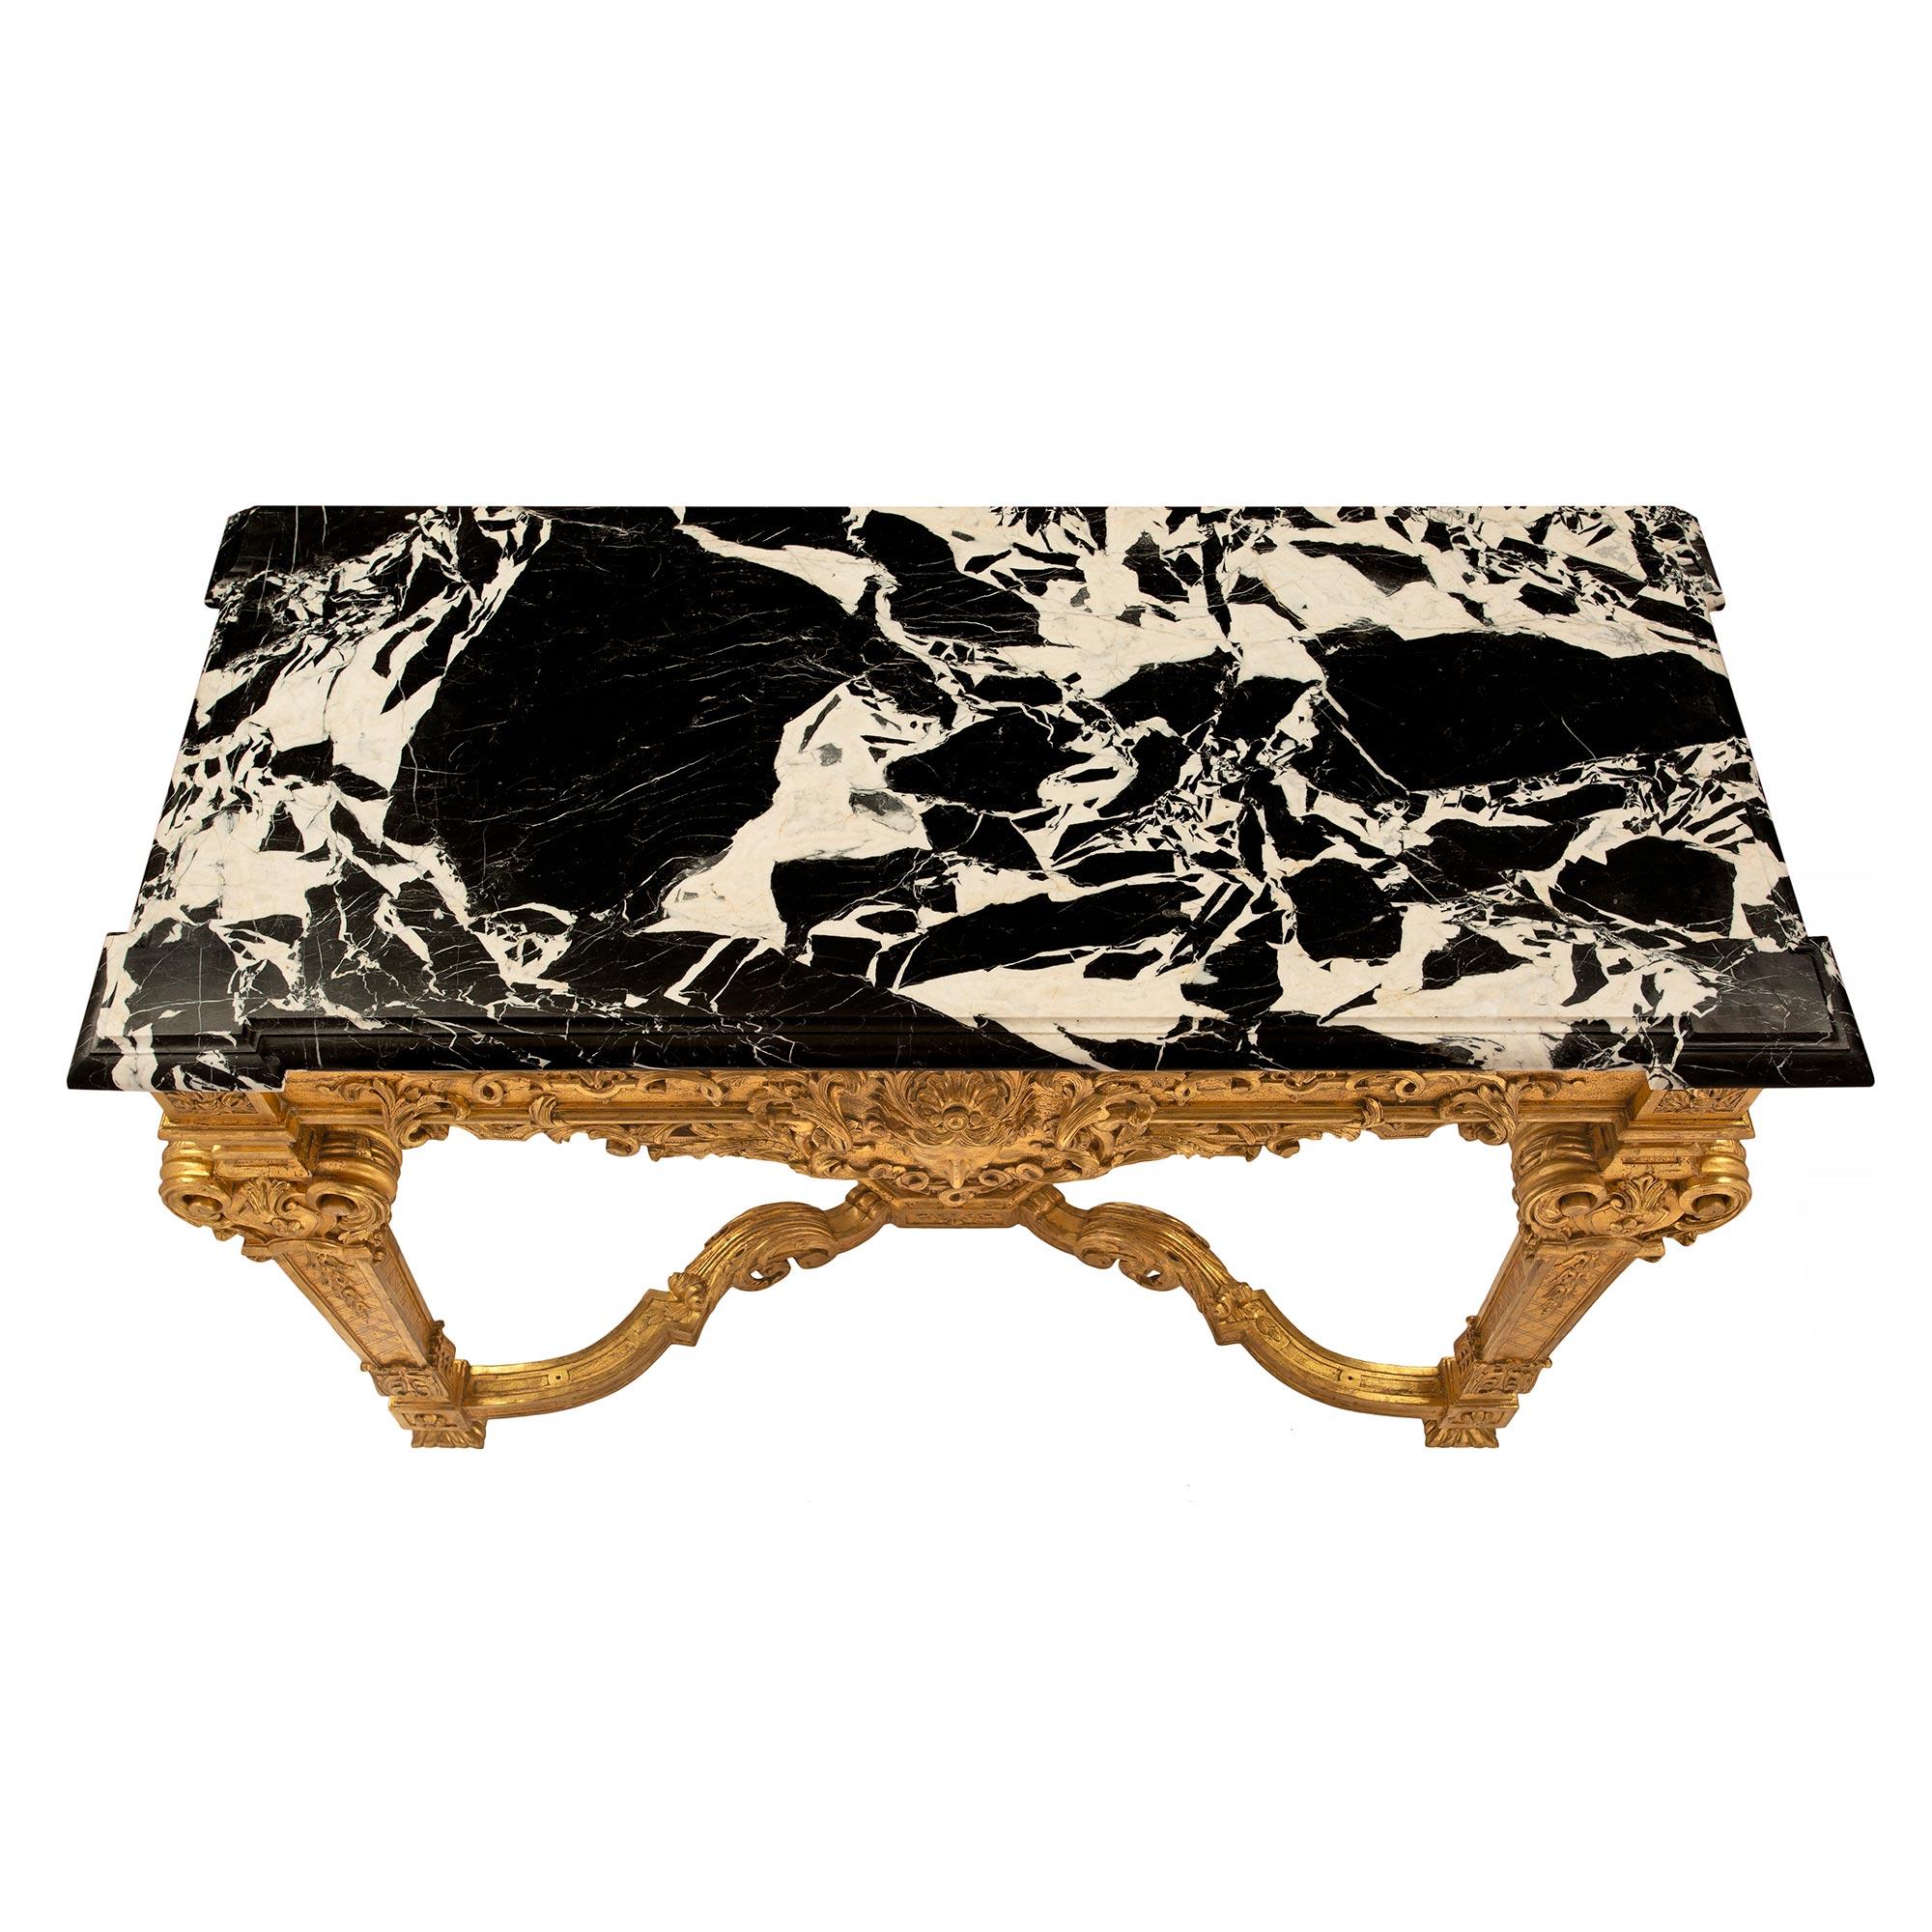 A stunning and large scale French 19th century Louis XIV st. giltwood and Grand Antique marble freestanding console. The console is raised by fine square foliate feet below block reserves, joined by a striking X shape stretcher. The stretcher